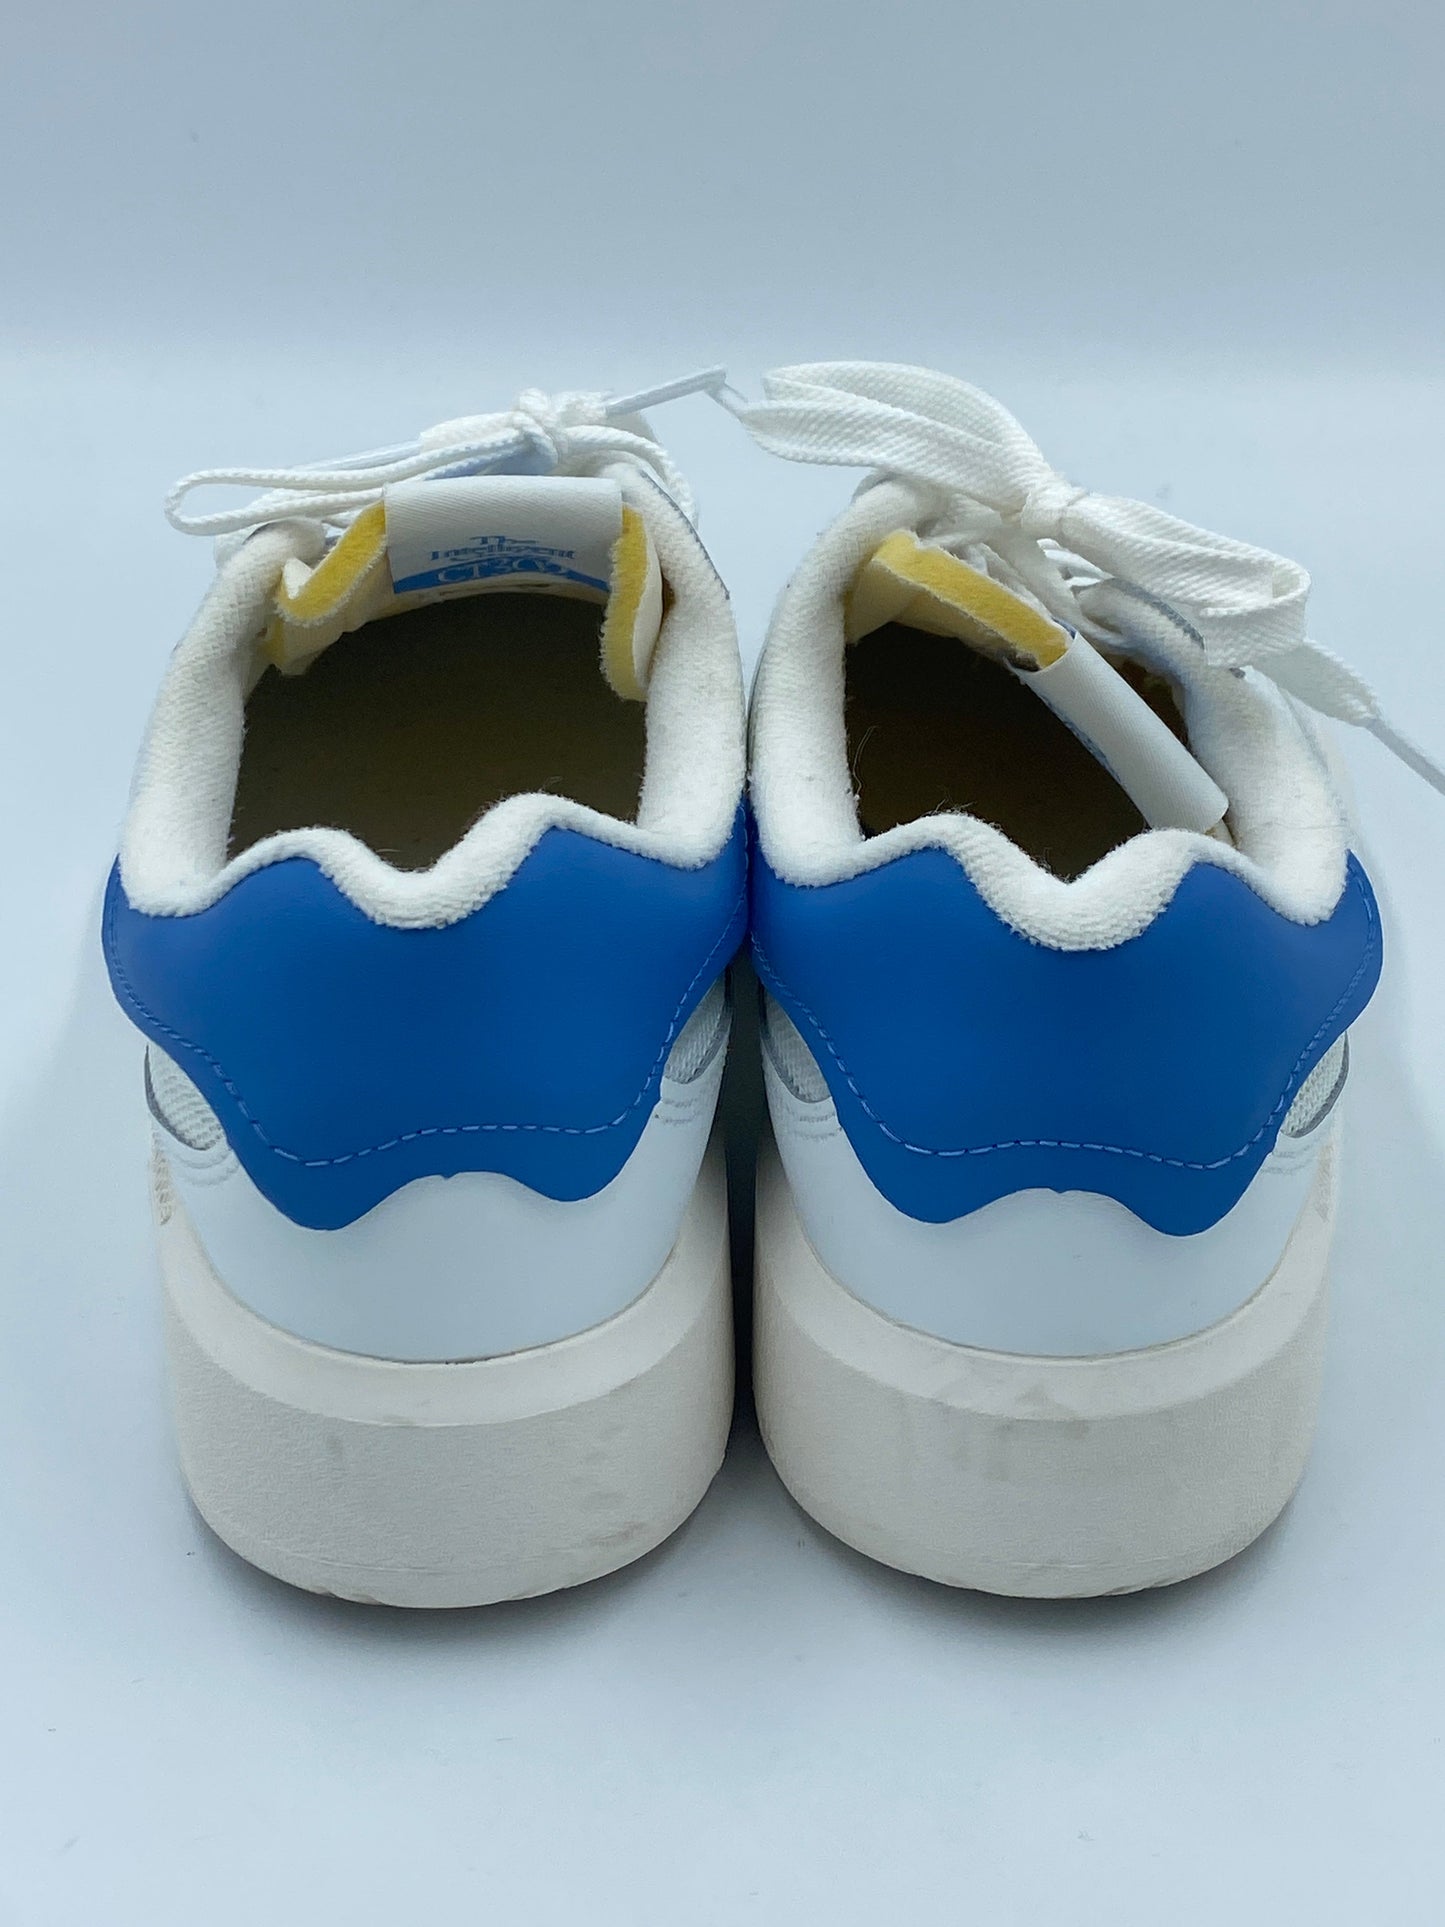 New Balance White Heritage Blue Sneakers,  Size 10 (W) / 8 (M)